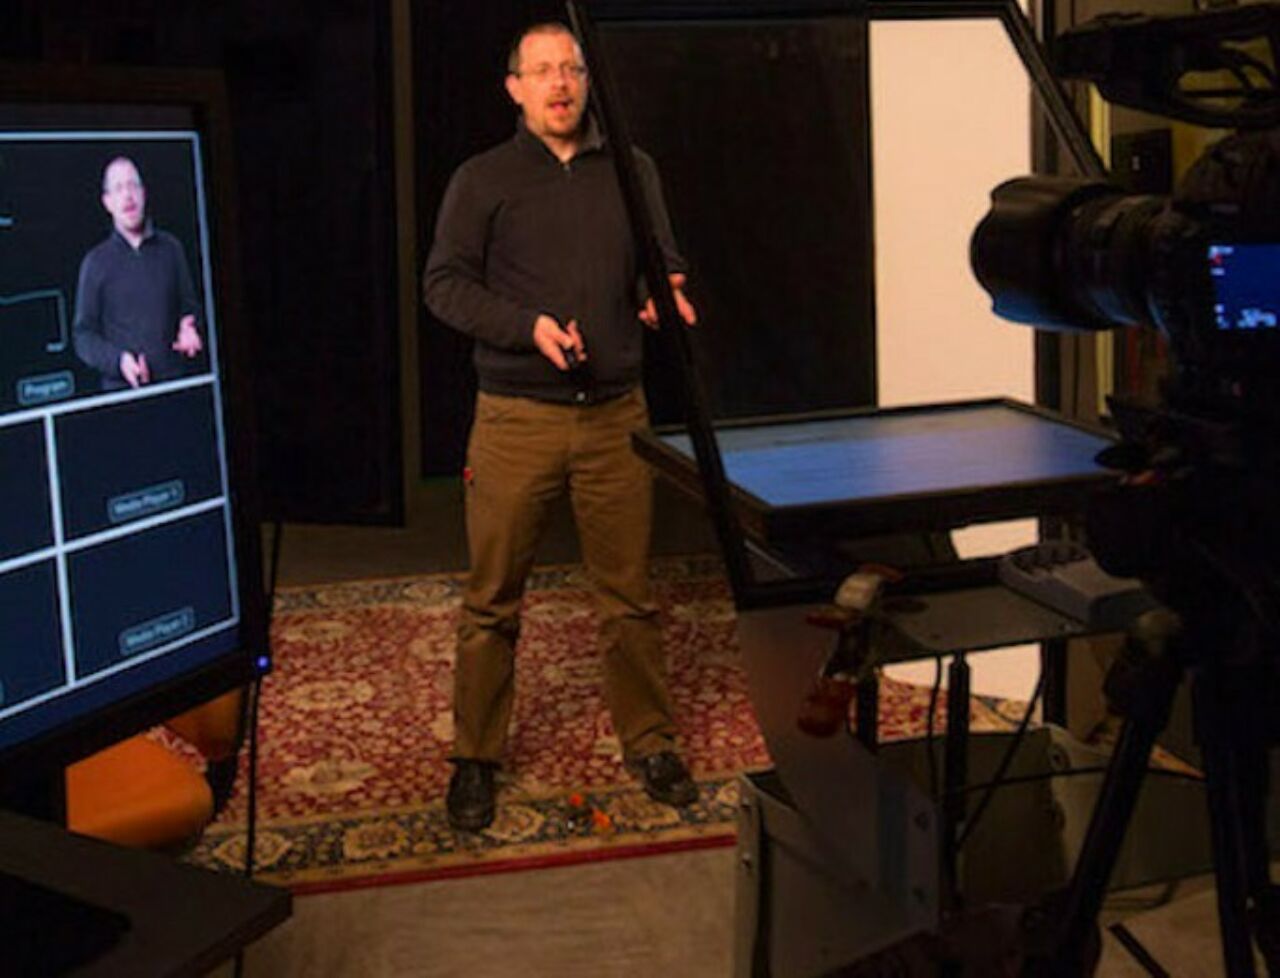 Architecture and landscape architecture professor Peter Aeschbacher filming online course content in a studio with camera and video monitors.